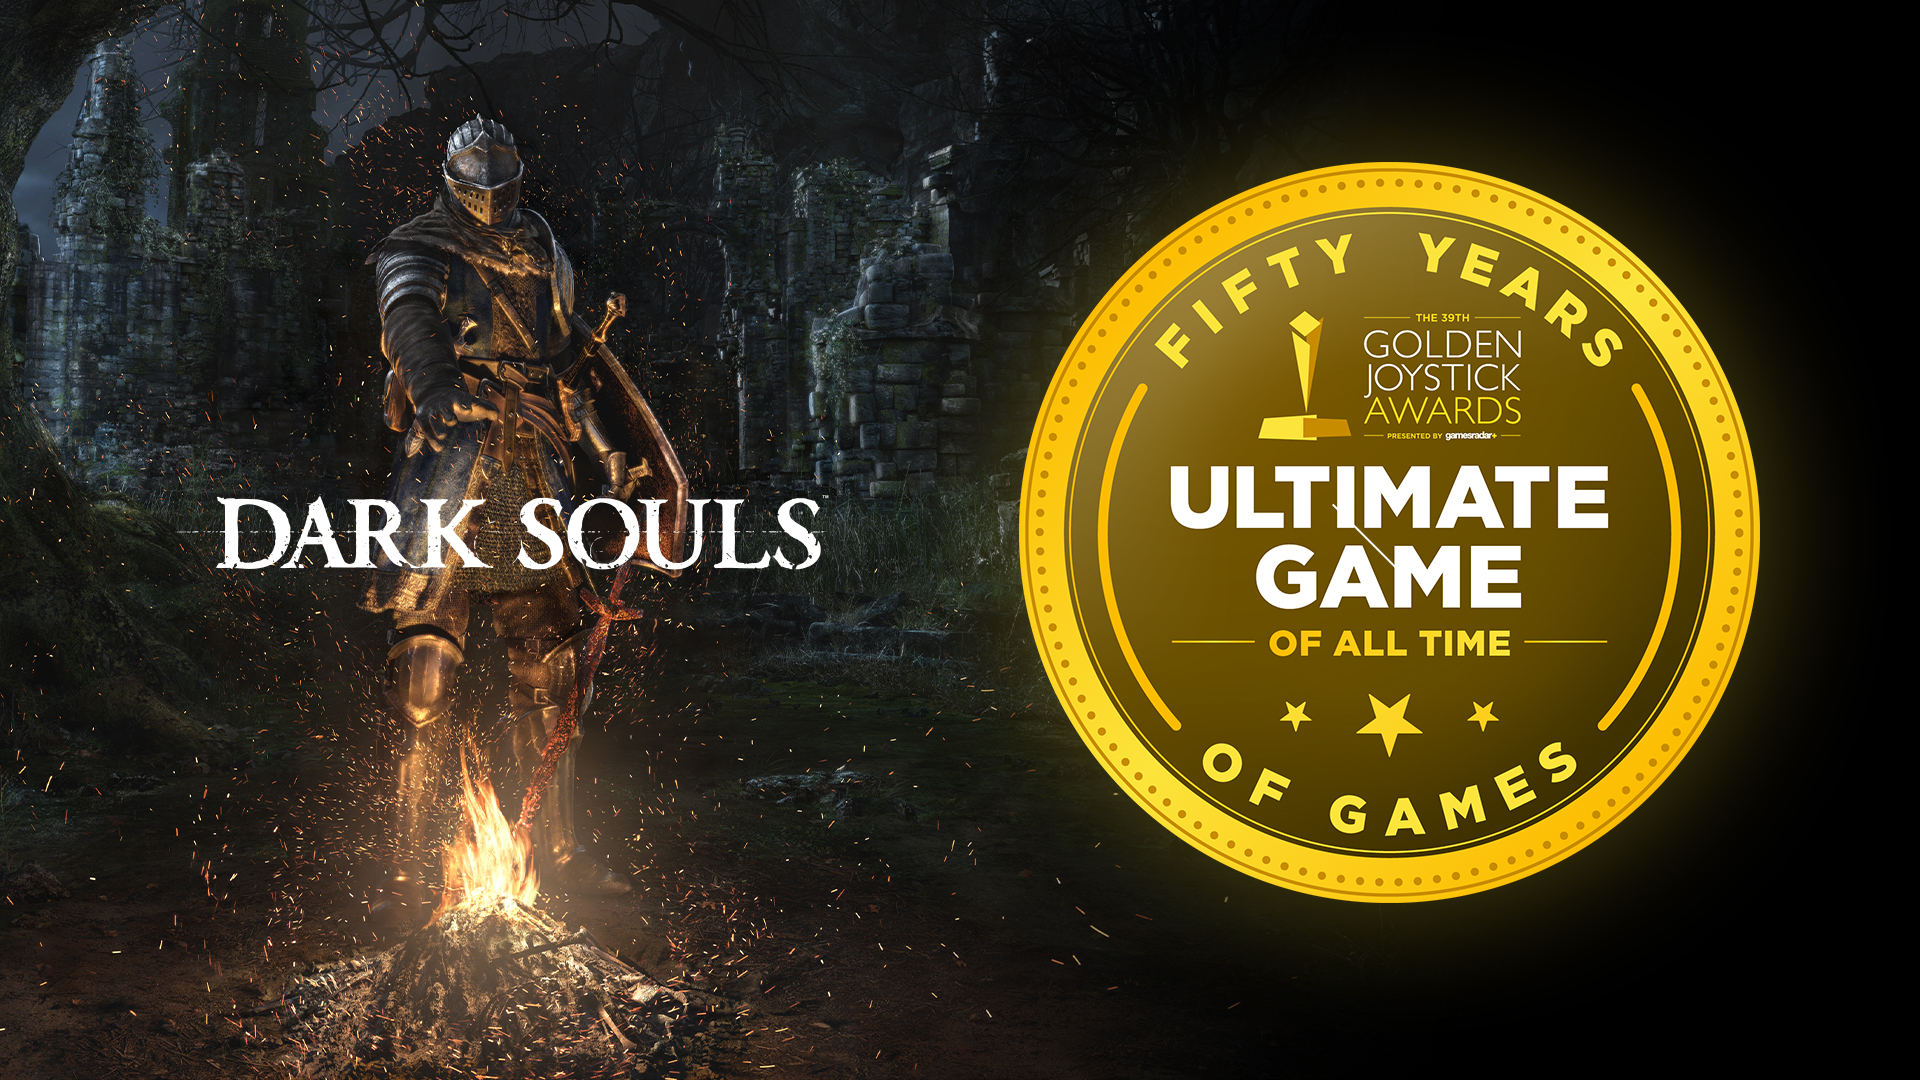 Dark Souls named 'Ultimate Game of All Time